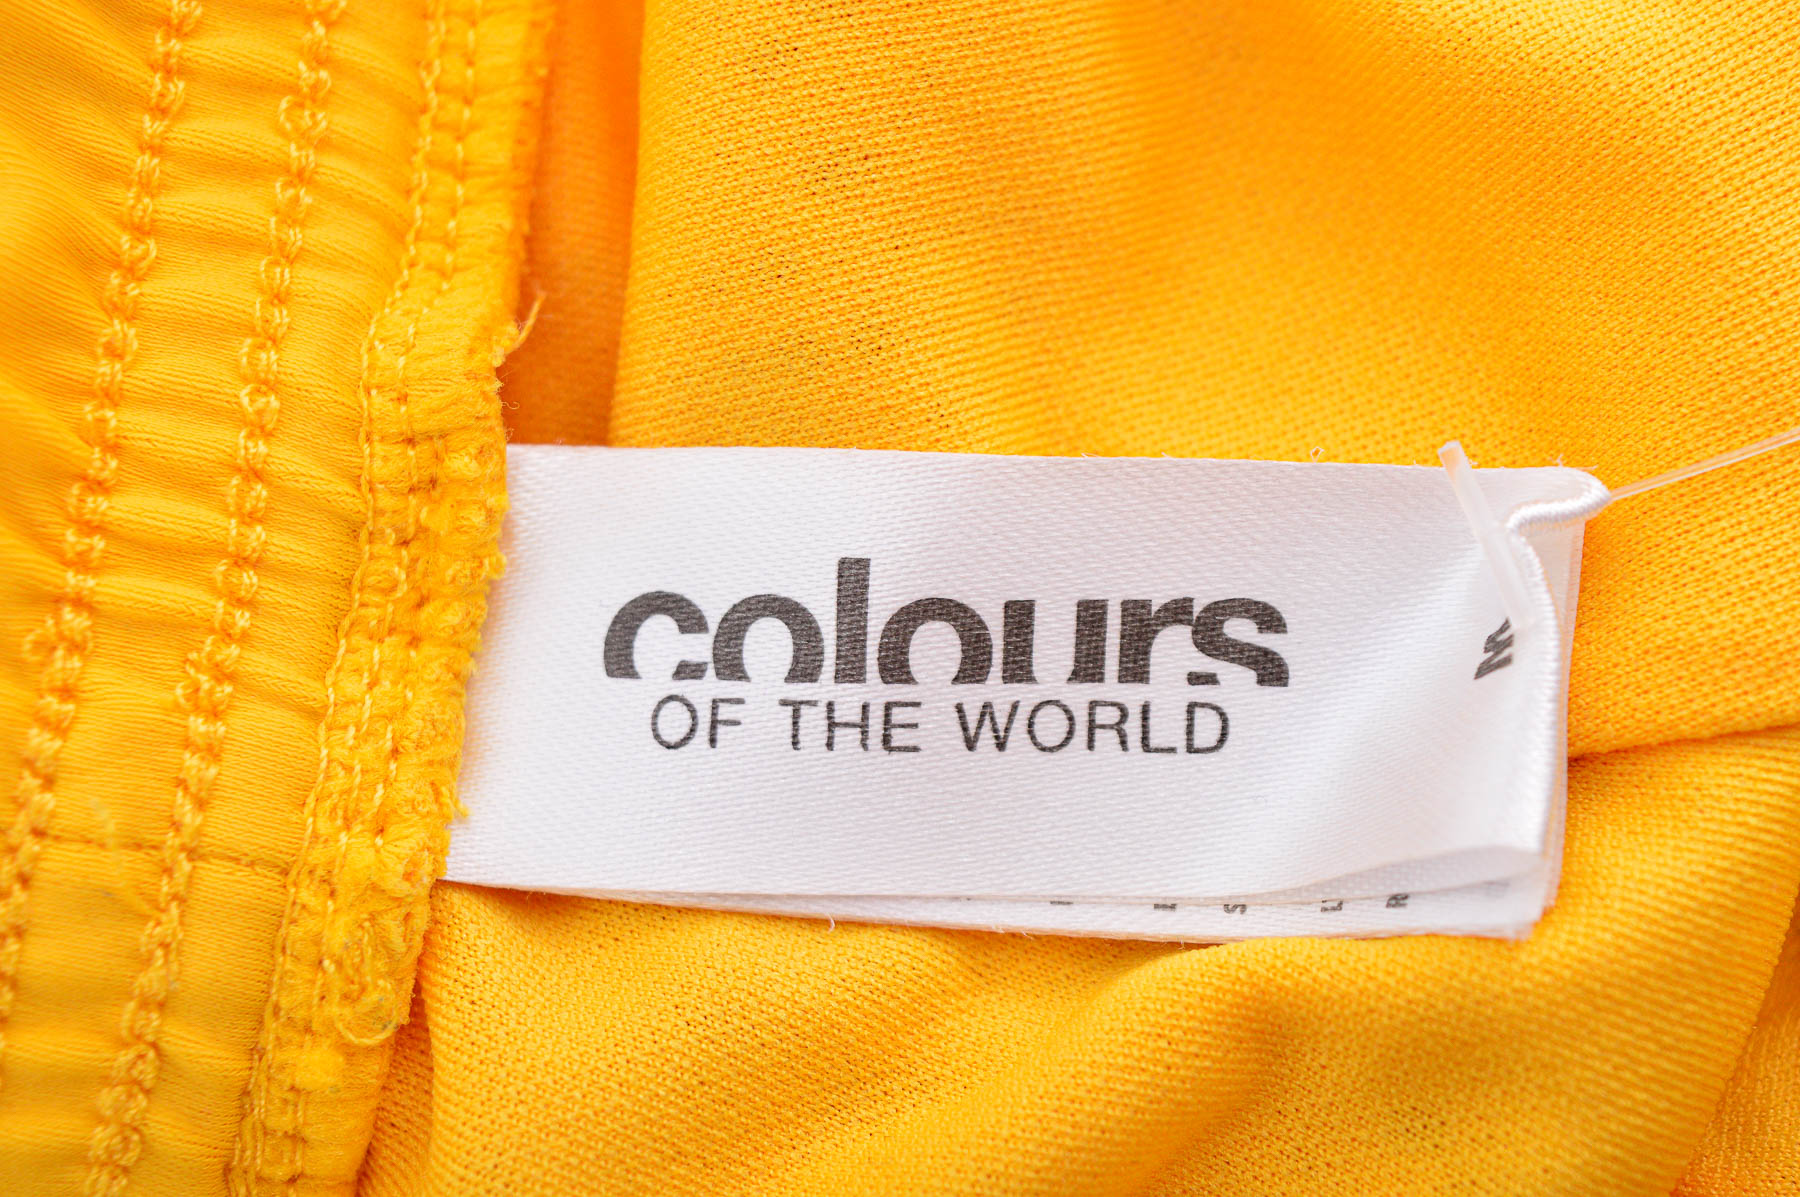 Female shorts - Colours of the world - 2